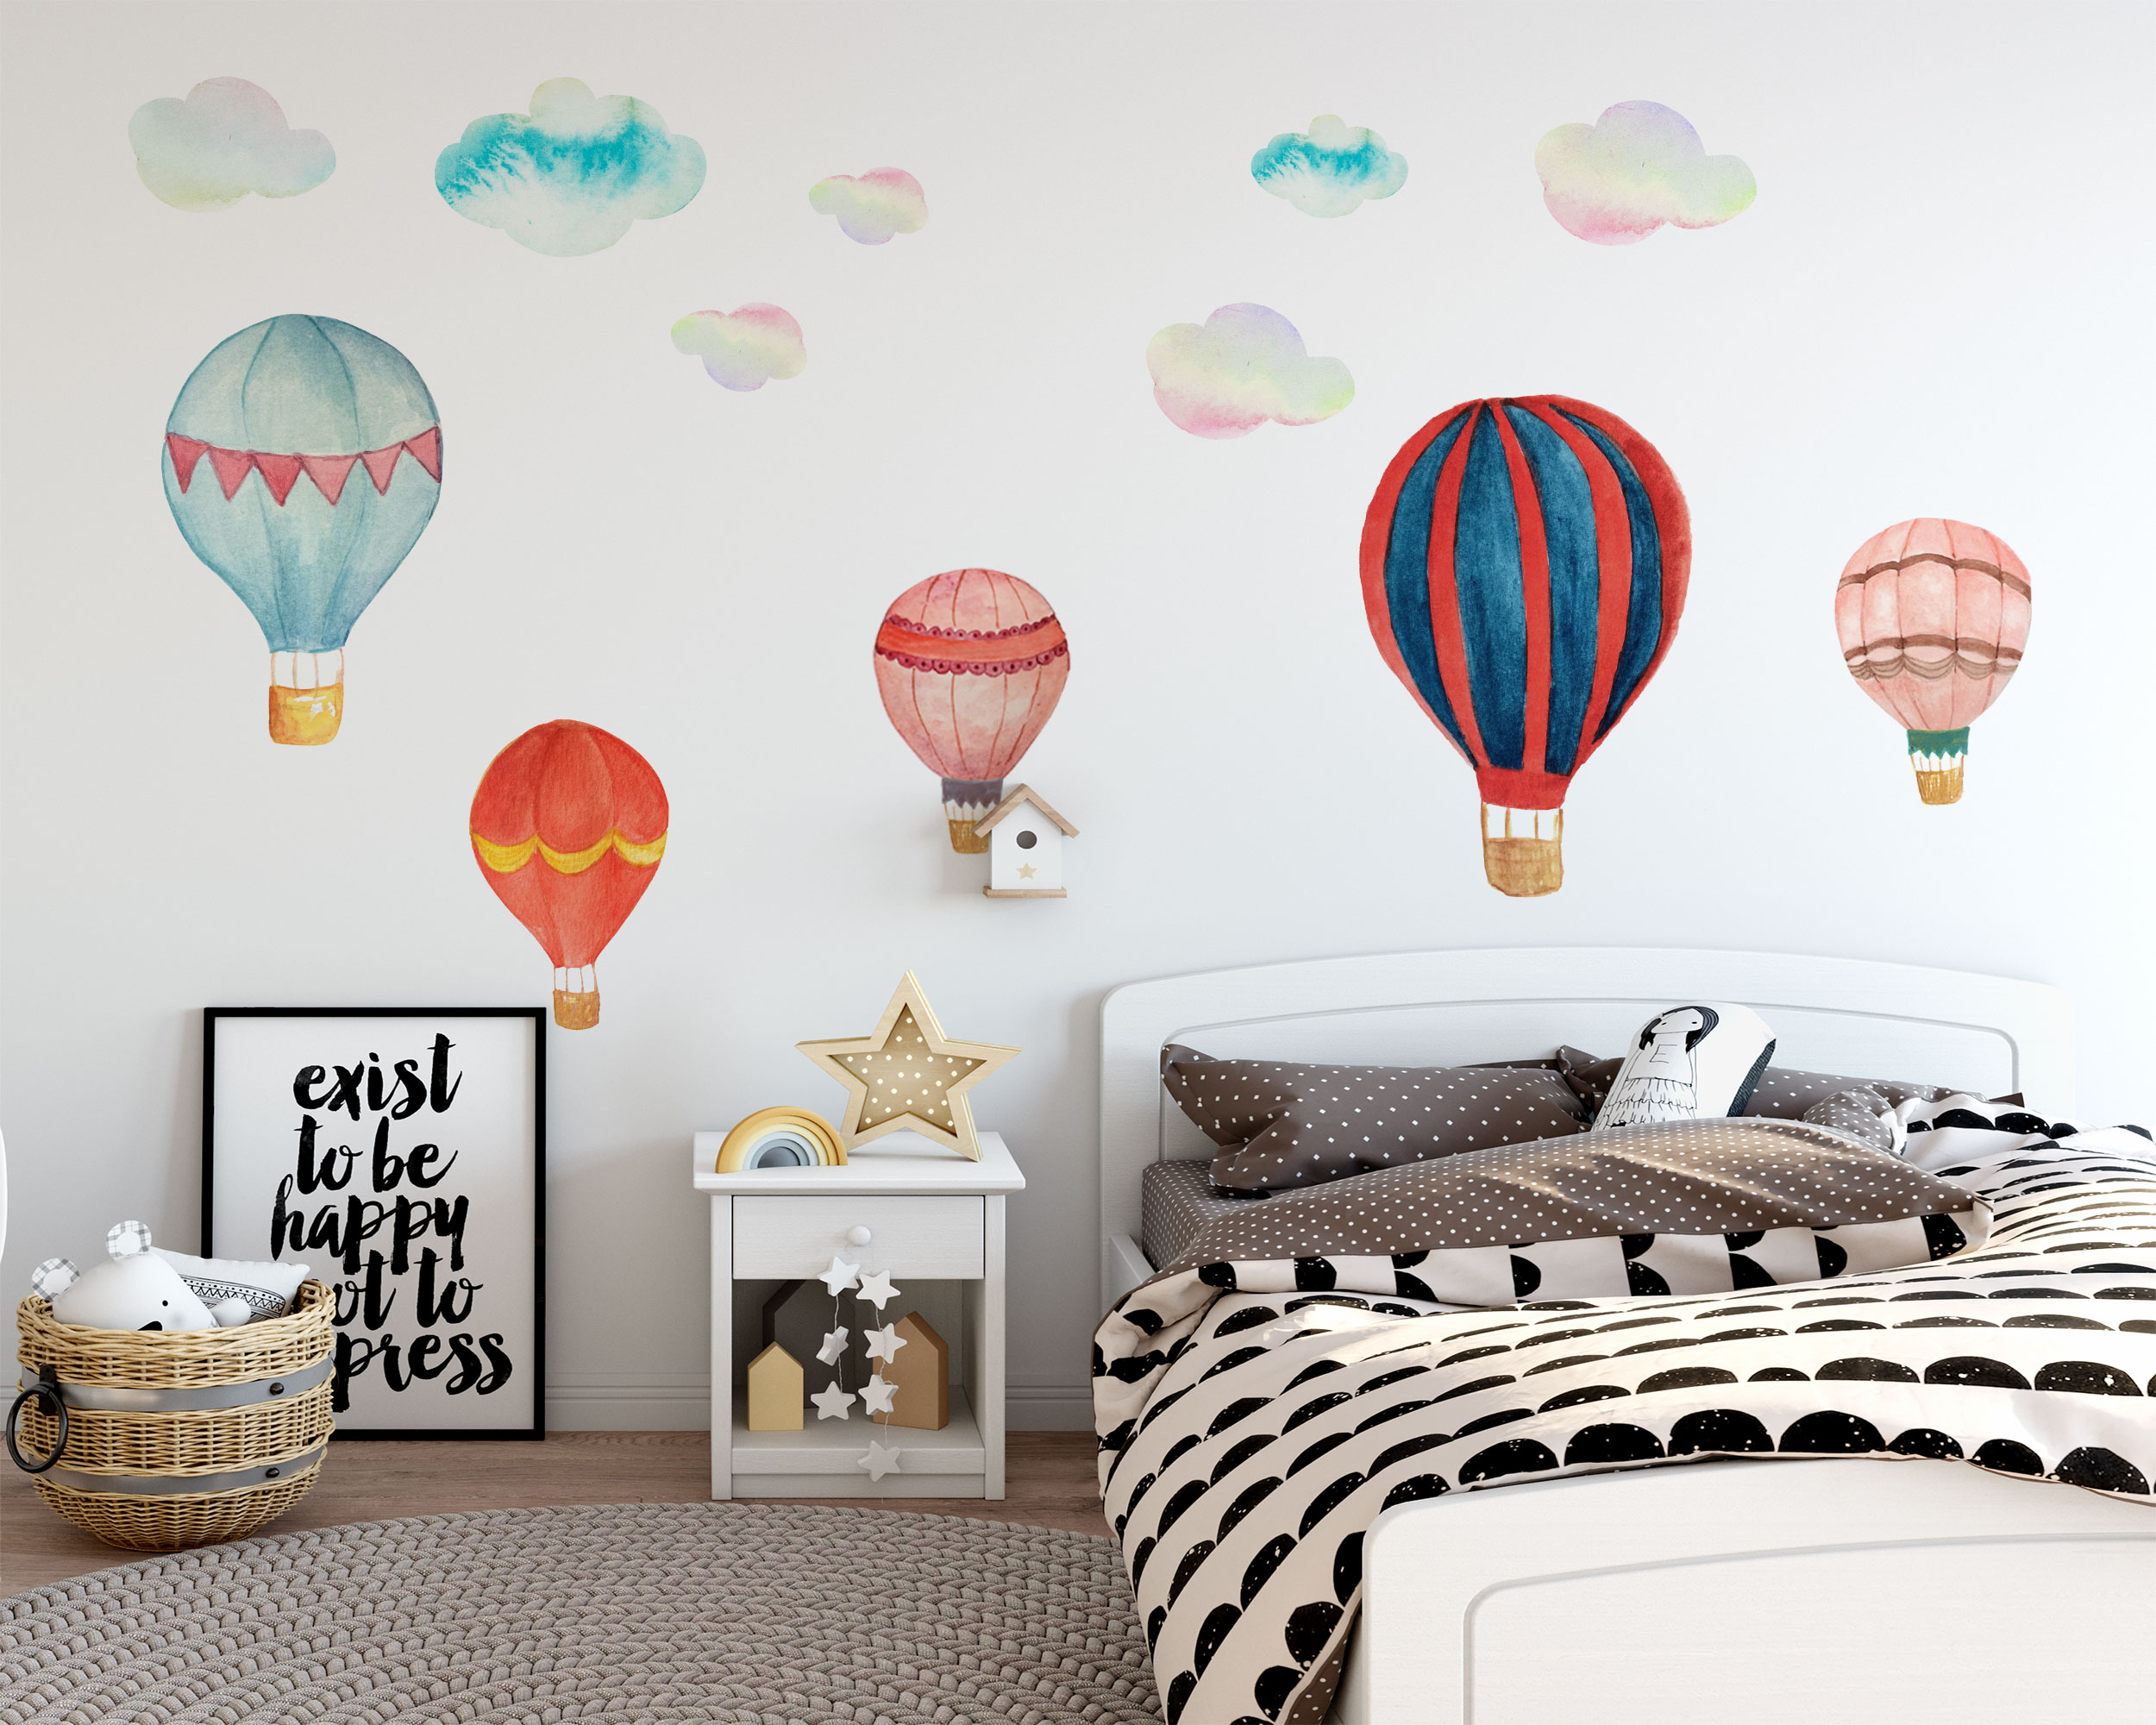 Car Wall Stickers for Kids Theme-Based Room Decor